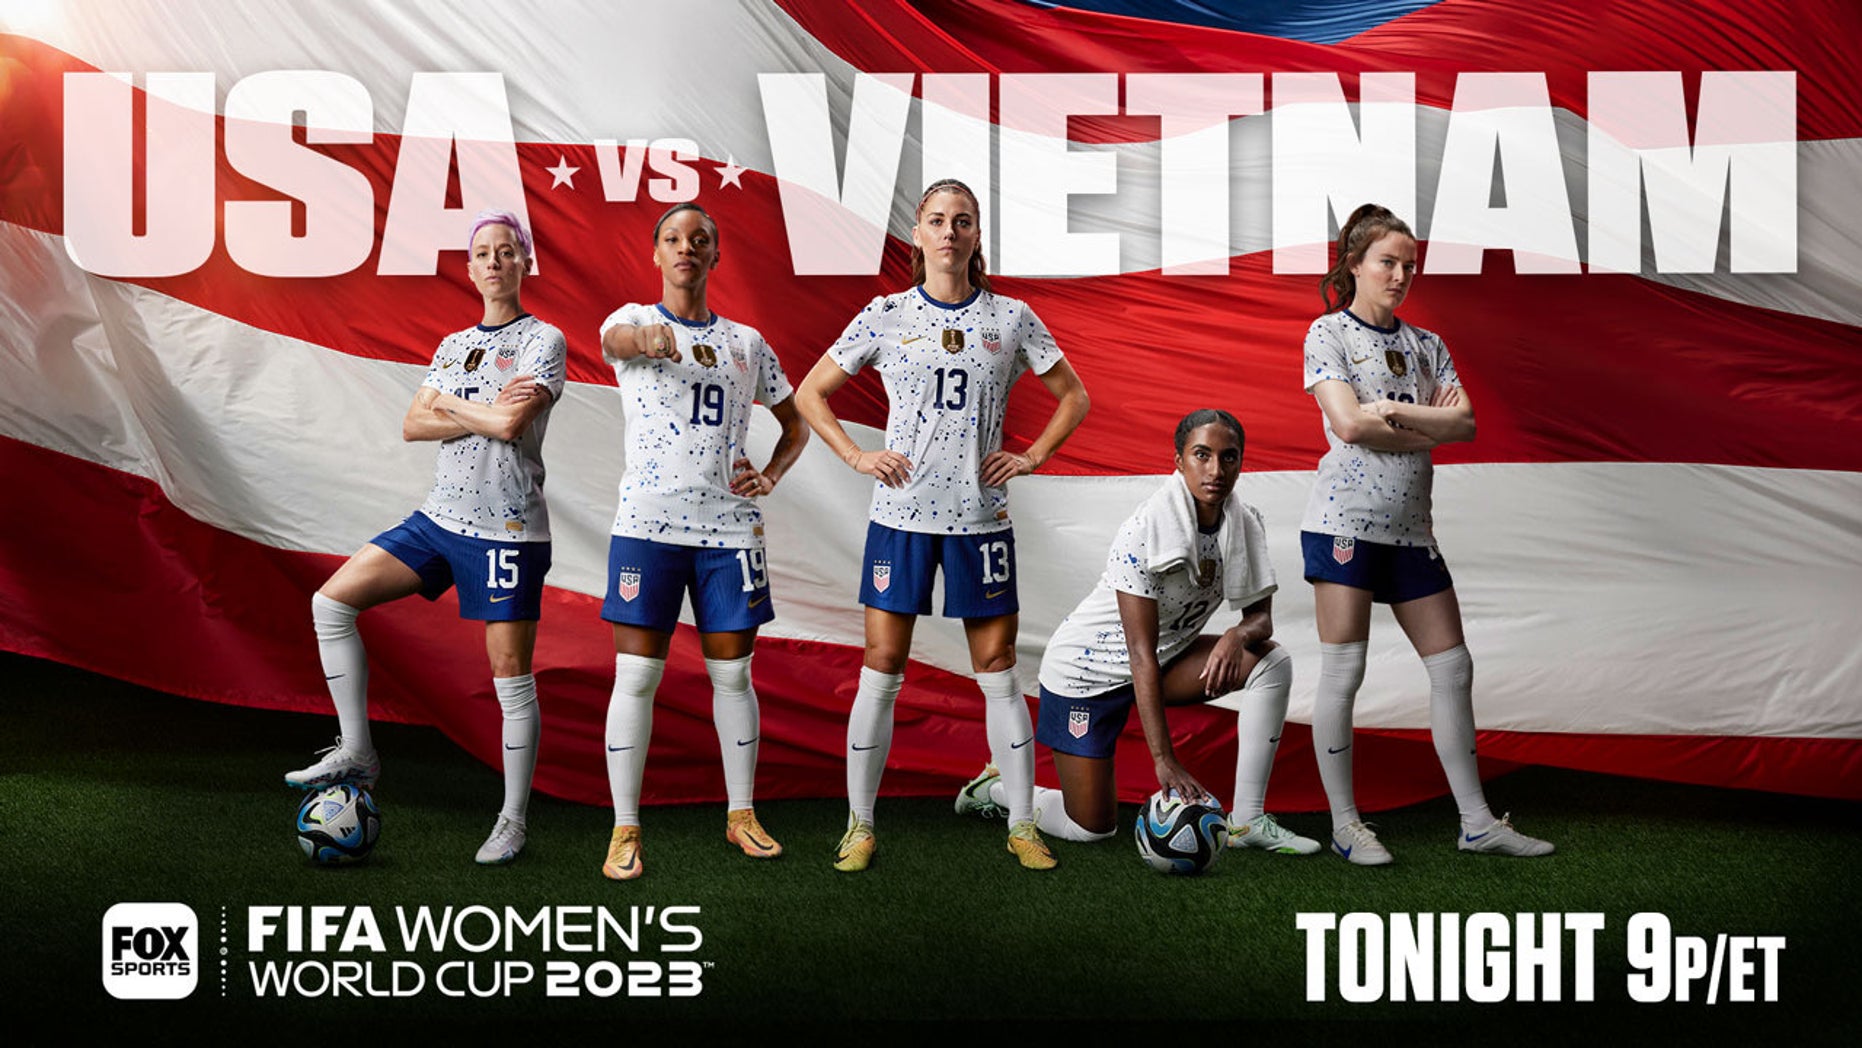 USWNT pose in graphic